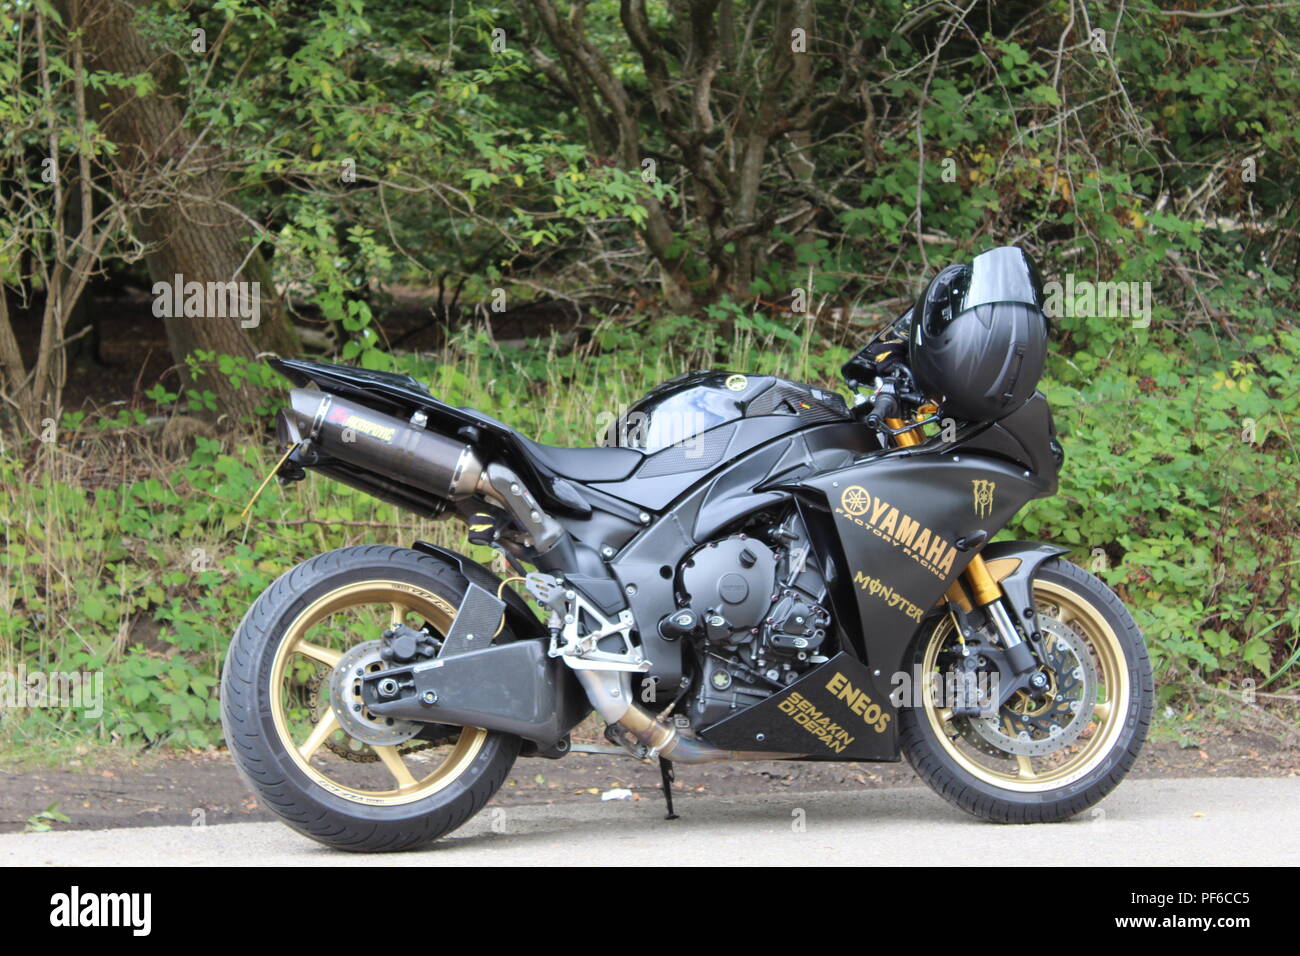 Yamaha Motorcycle at Epping Forest Stock Photo